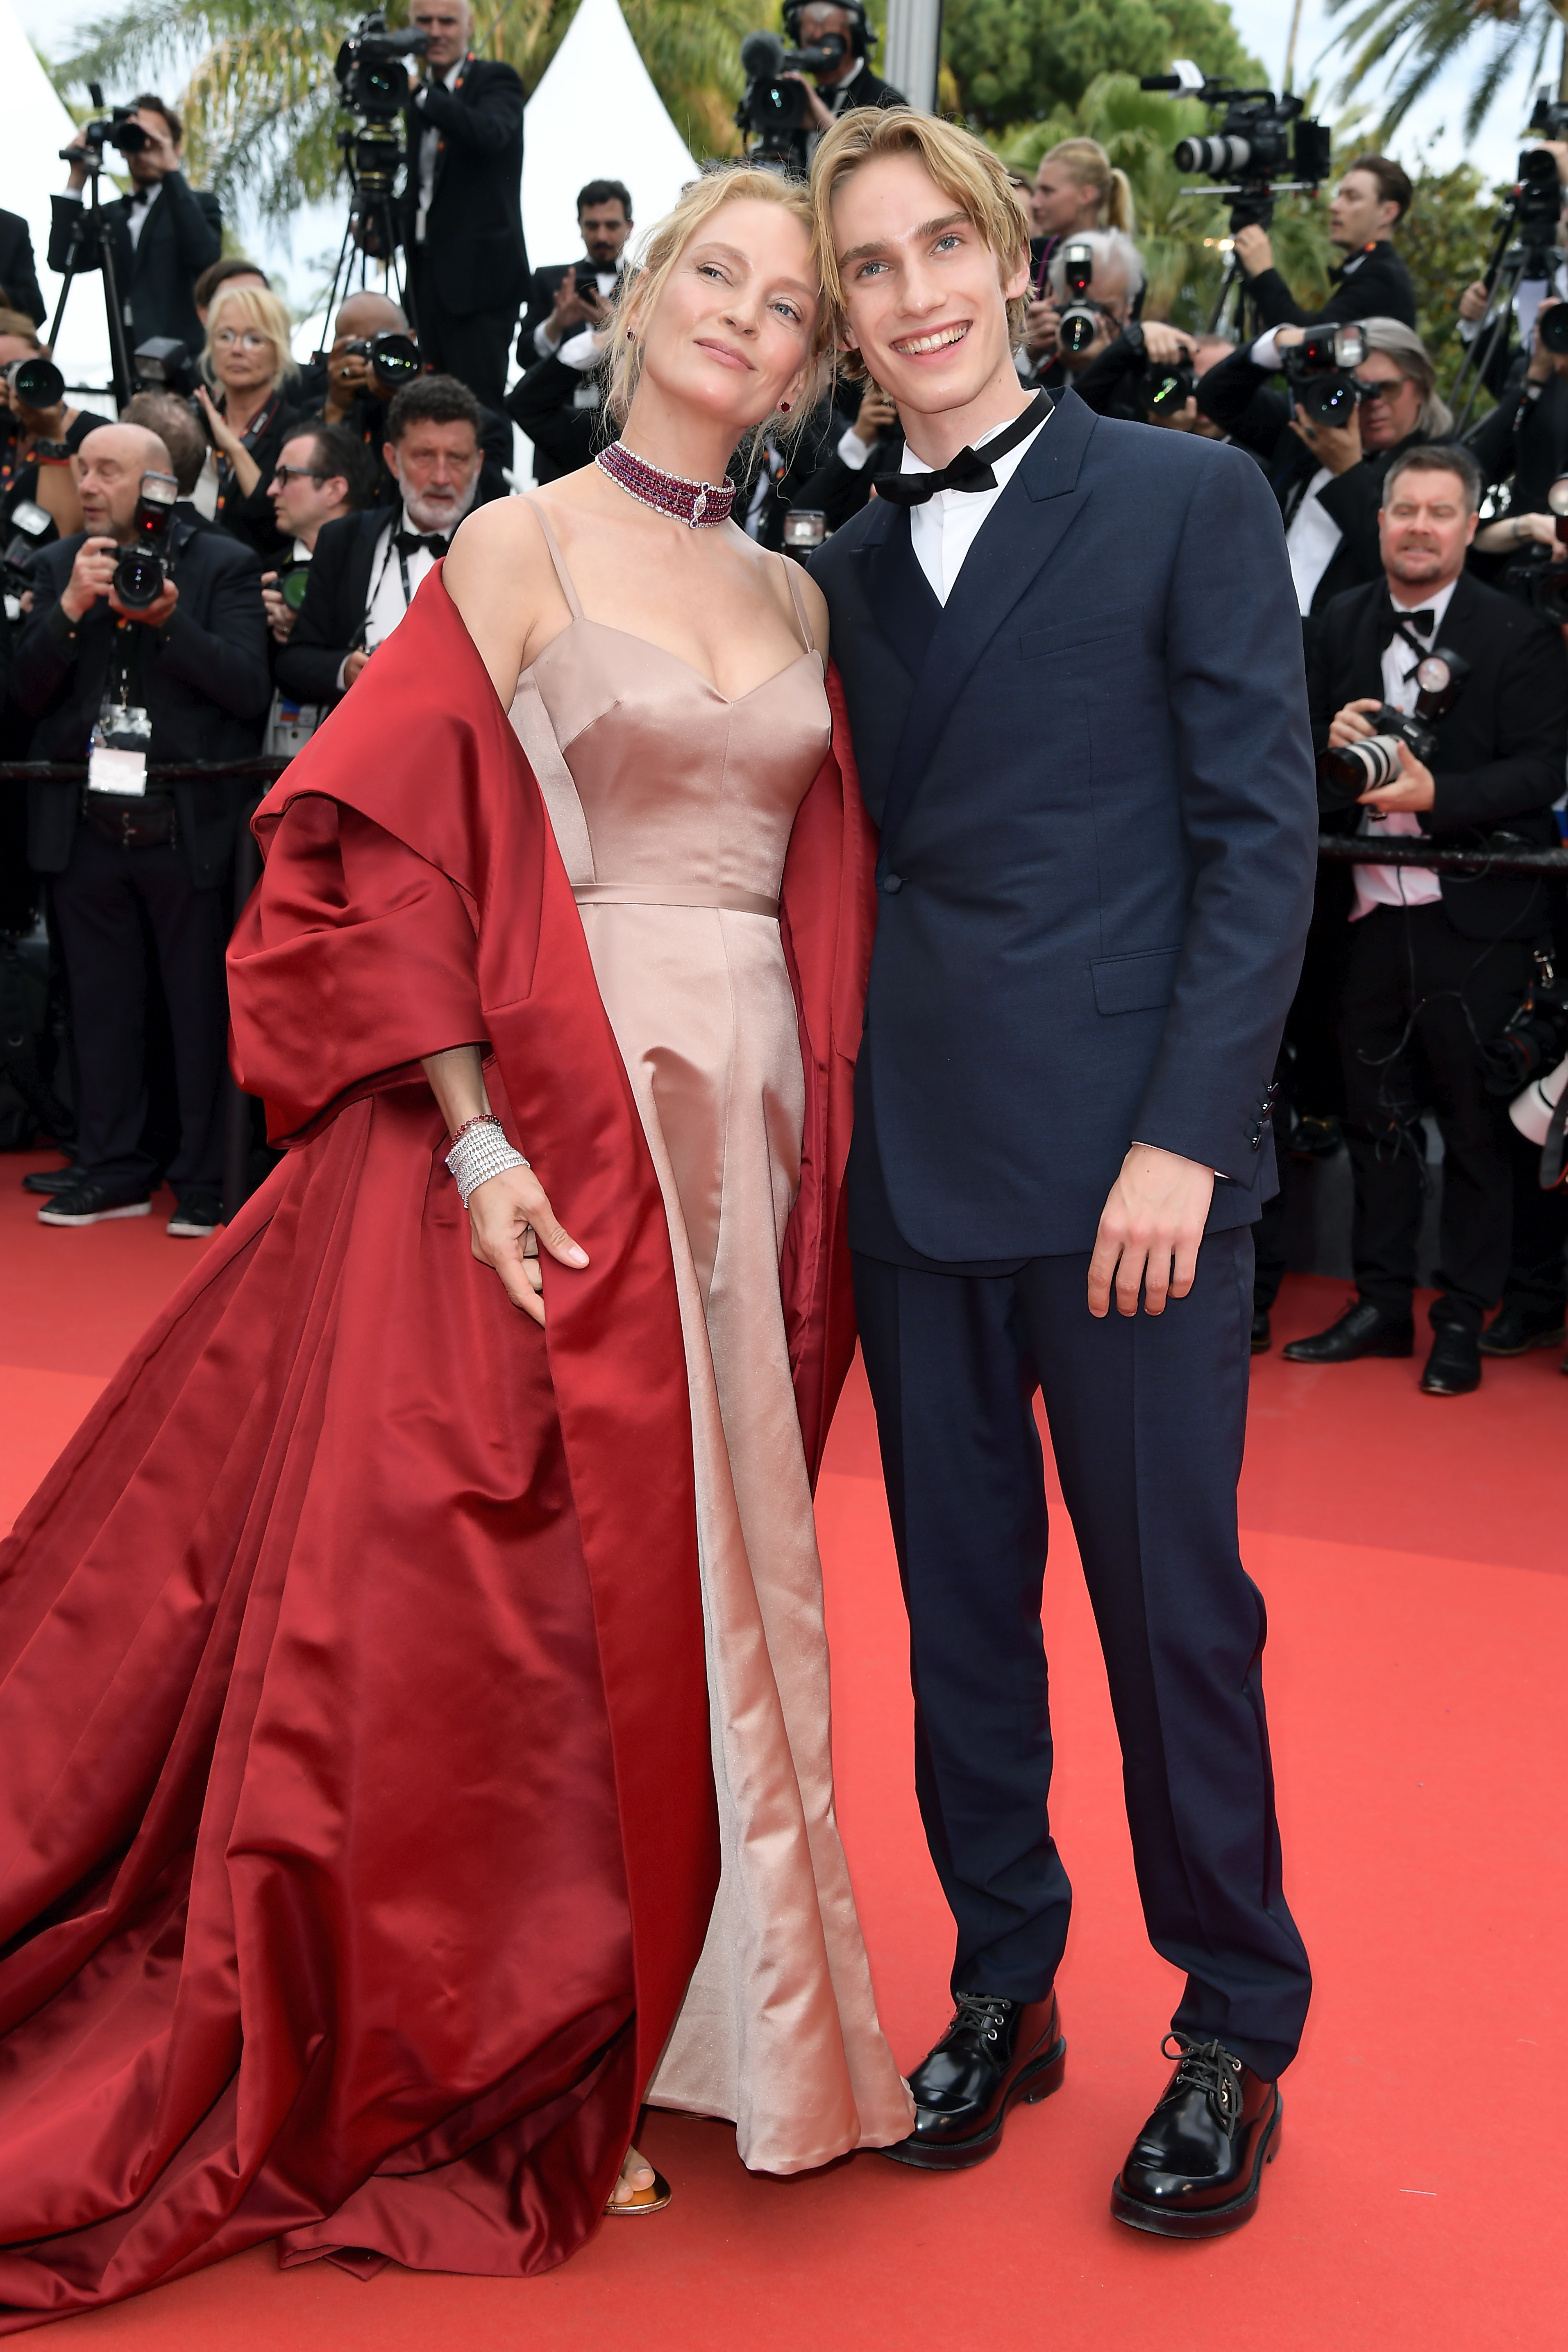 Uma Thurman and Levon Roan Thurman-Hawke at the "Jeanne du Barry" screening and opening ceremony red carpet at the 76th annual Cannes Film Festival on May 16, 2023, in Cannes, France | Source: Getty Images